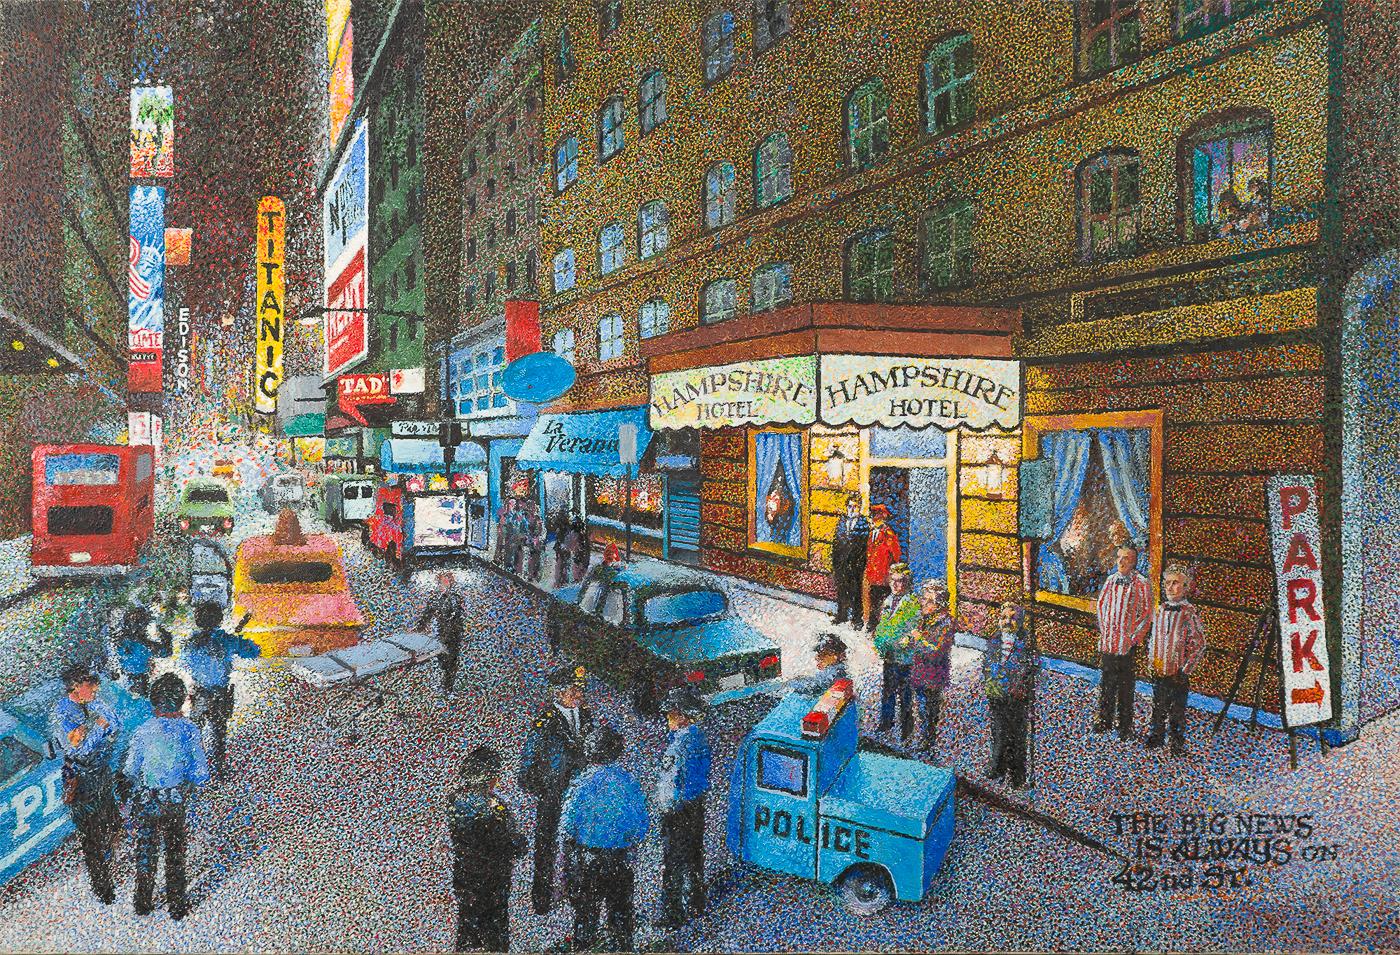 Alec Montroy Landscape Painting - The Big News is Always on 42nd Street